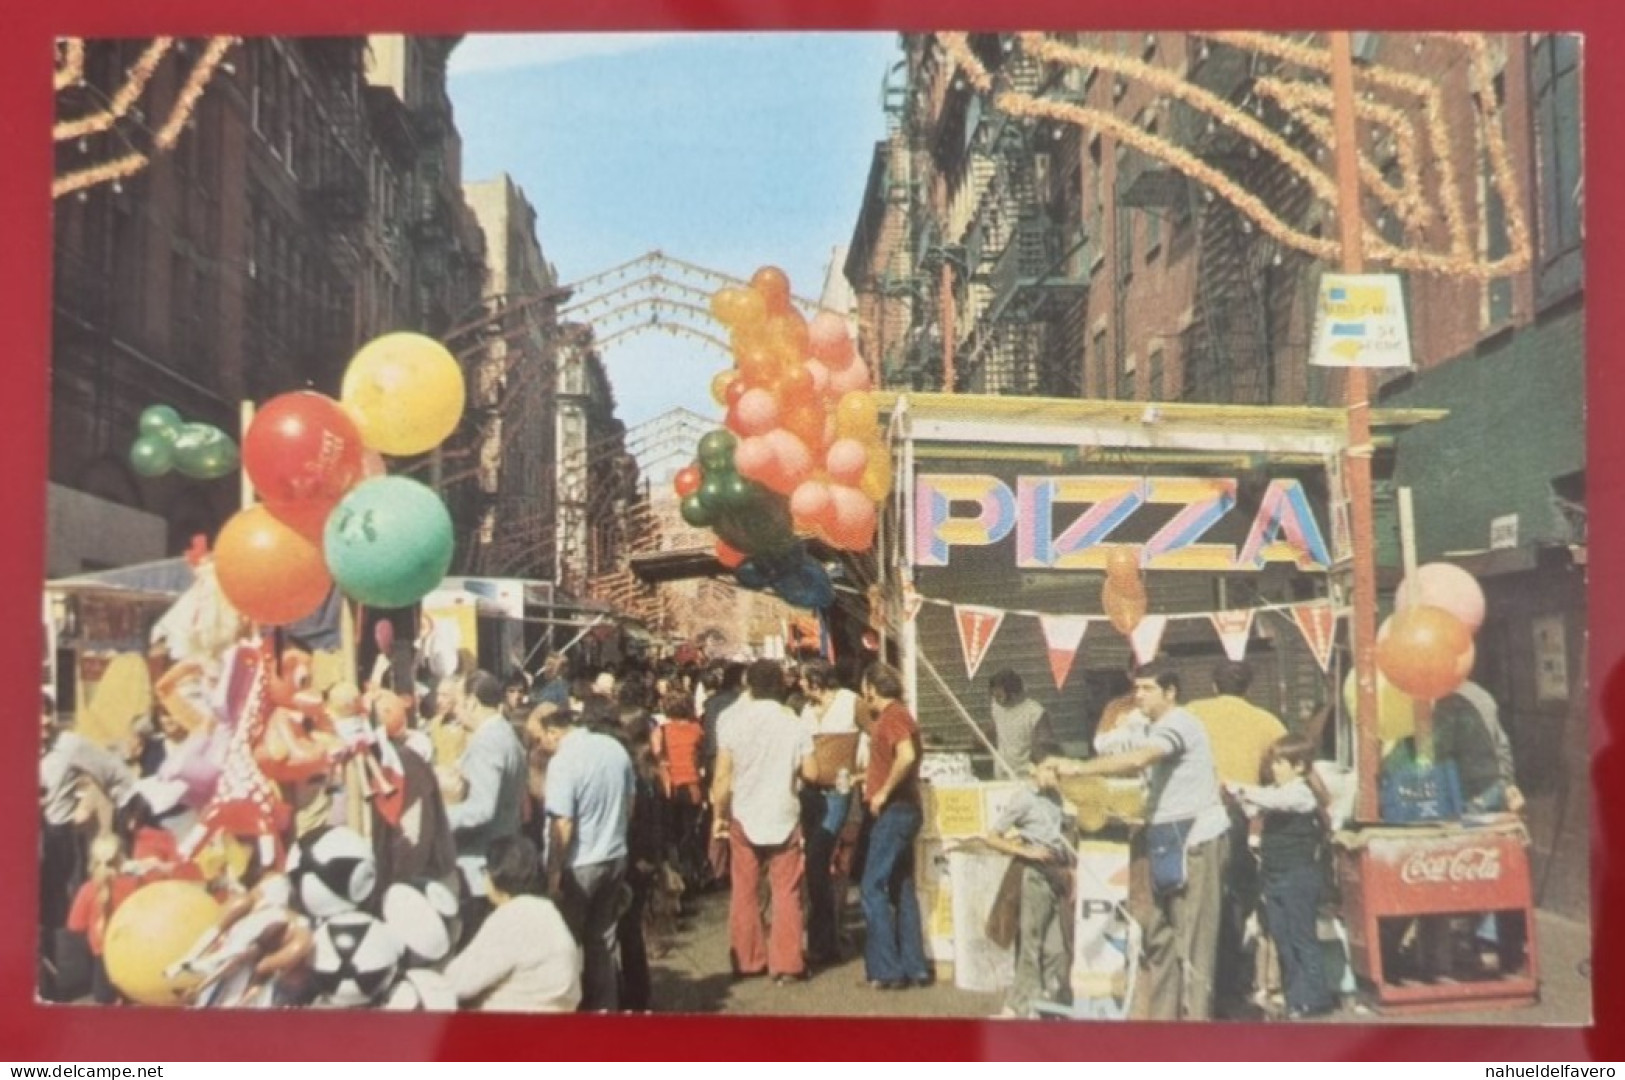 Uncirculated Postcard - USA - NY, NEW YORK CITY - SAN GENNARO, An Italian Festival Held On Mulberry Street, Little Italy - Places & Squares